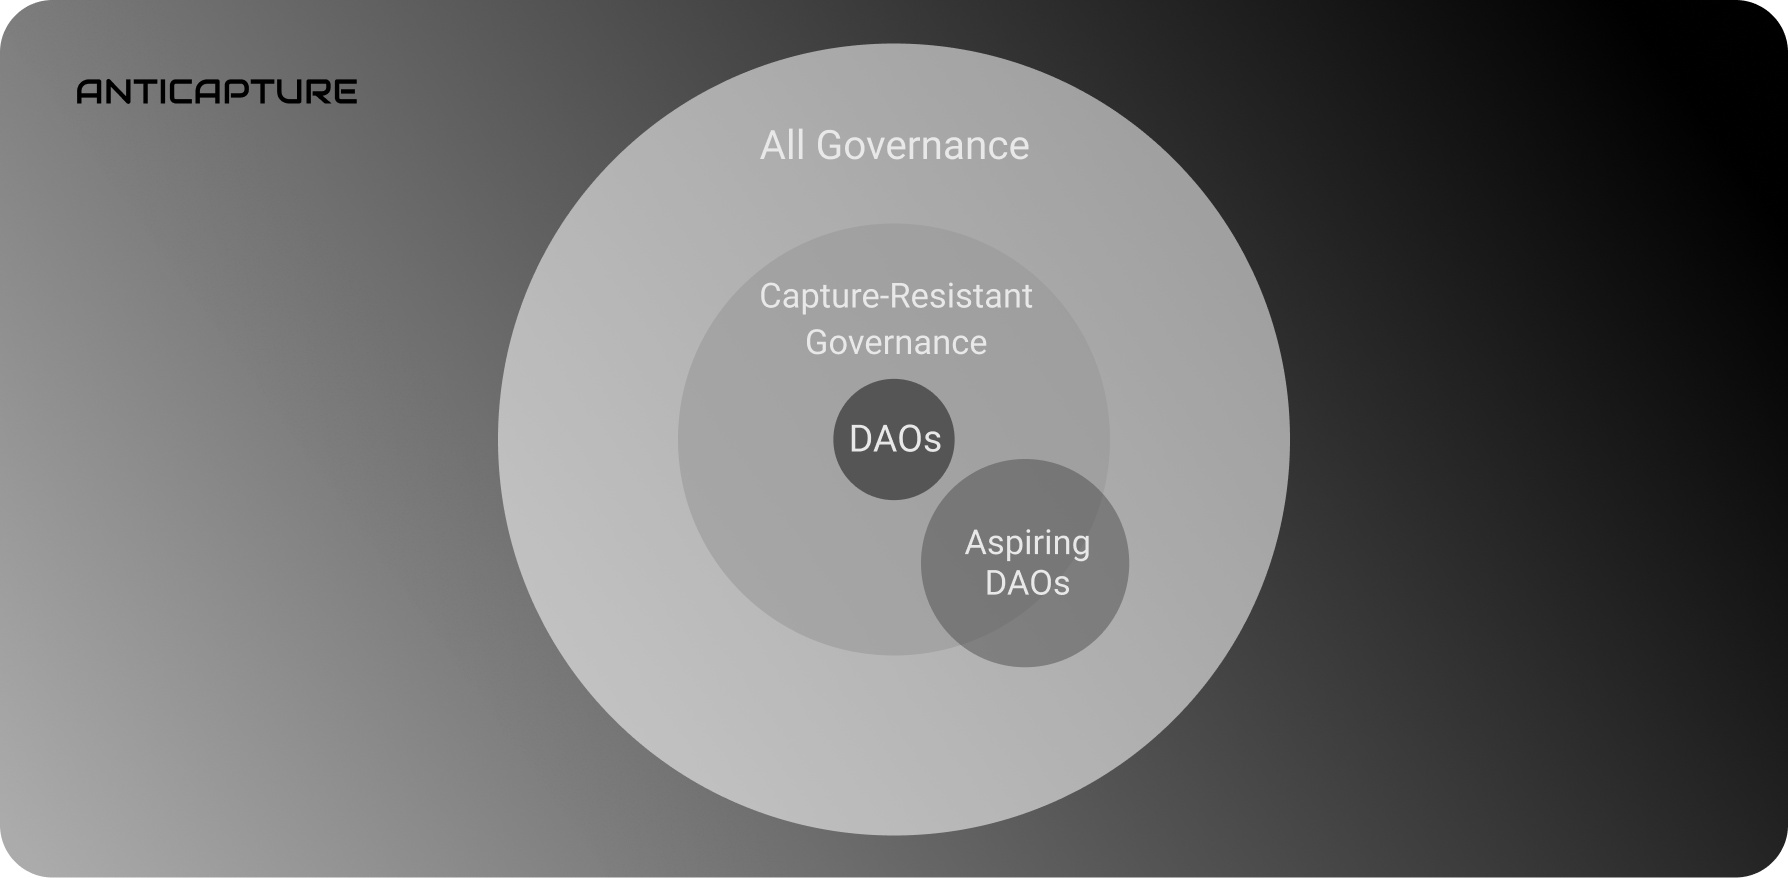 Many Aspiring DAOs are much less resistant to capture than DAOs.